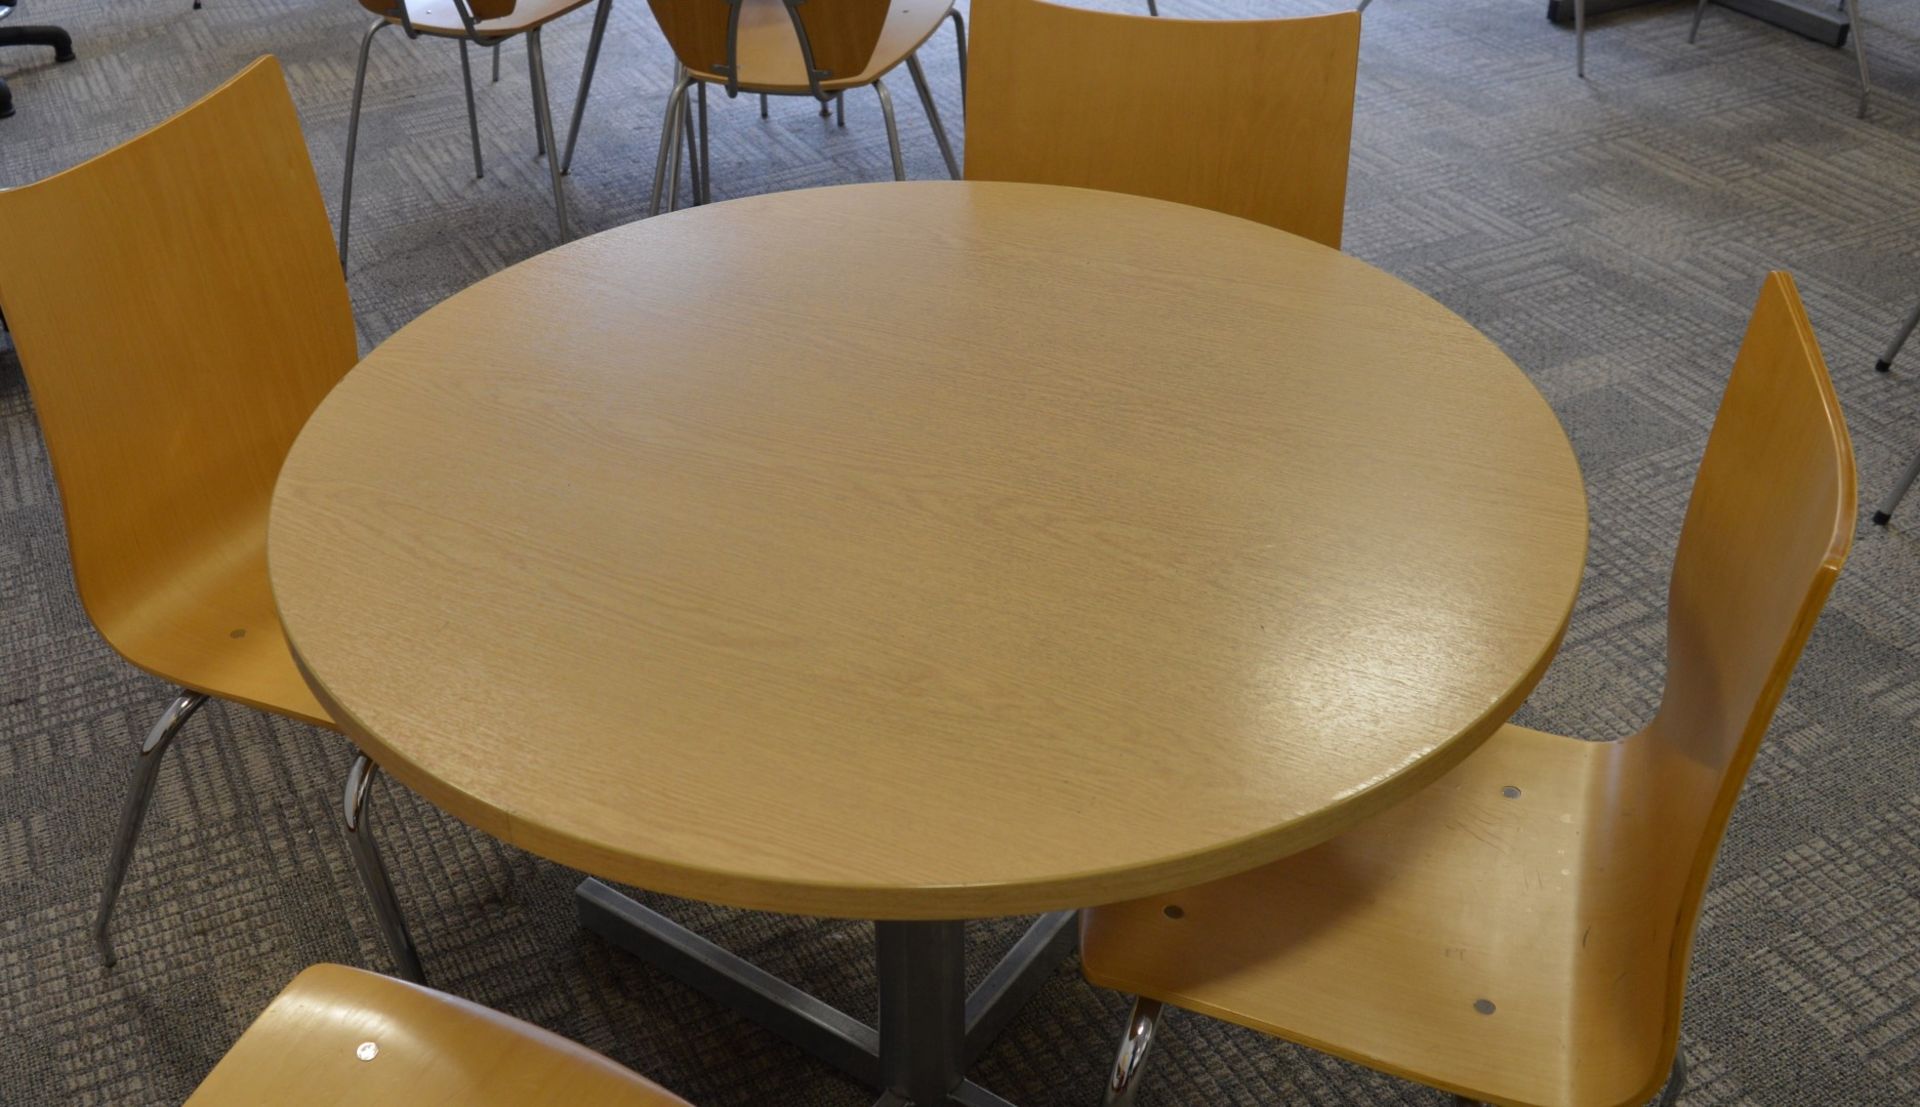 1 x Staff Room Table With Four Matching Chairs - Oak Table Finish and Beech Chairs - Contemporay - Image 2 of 3